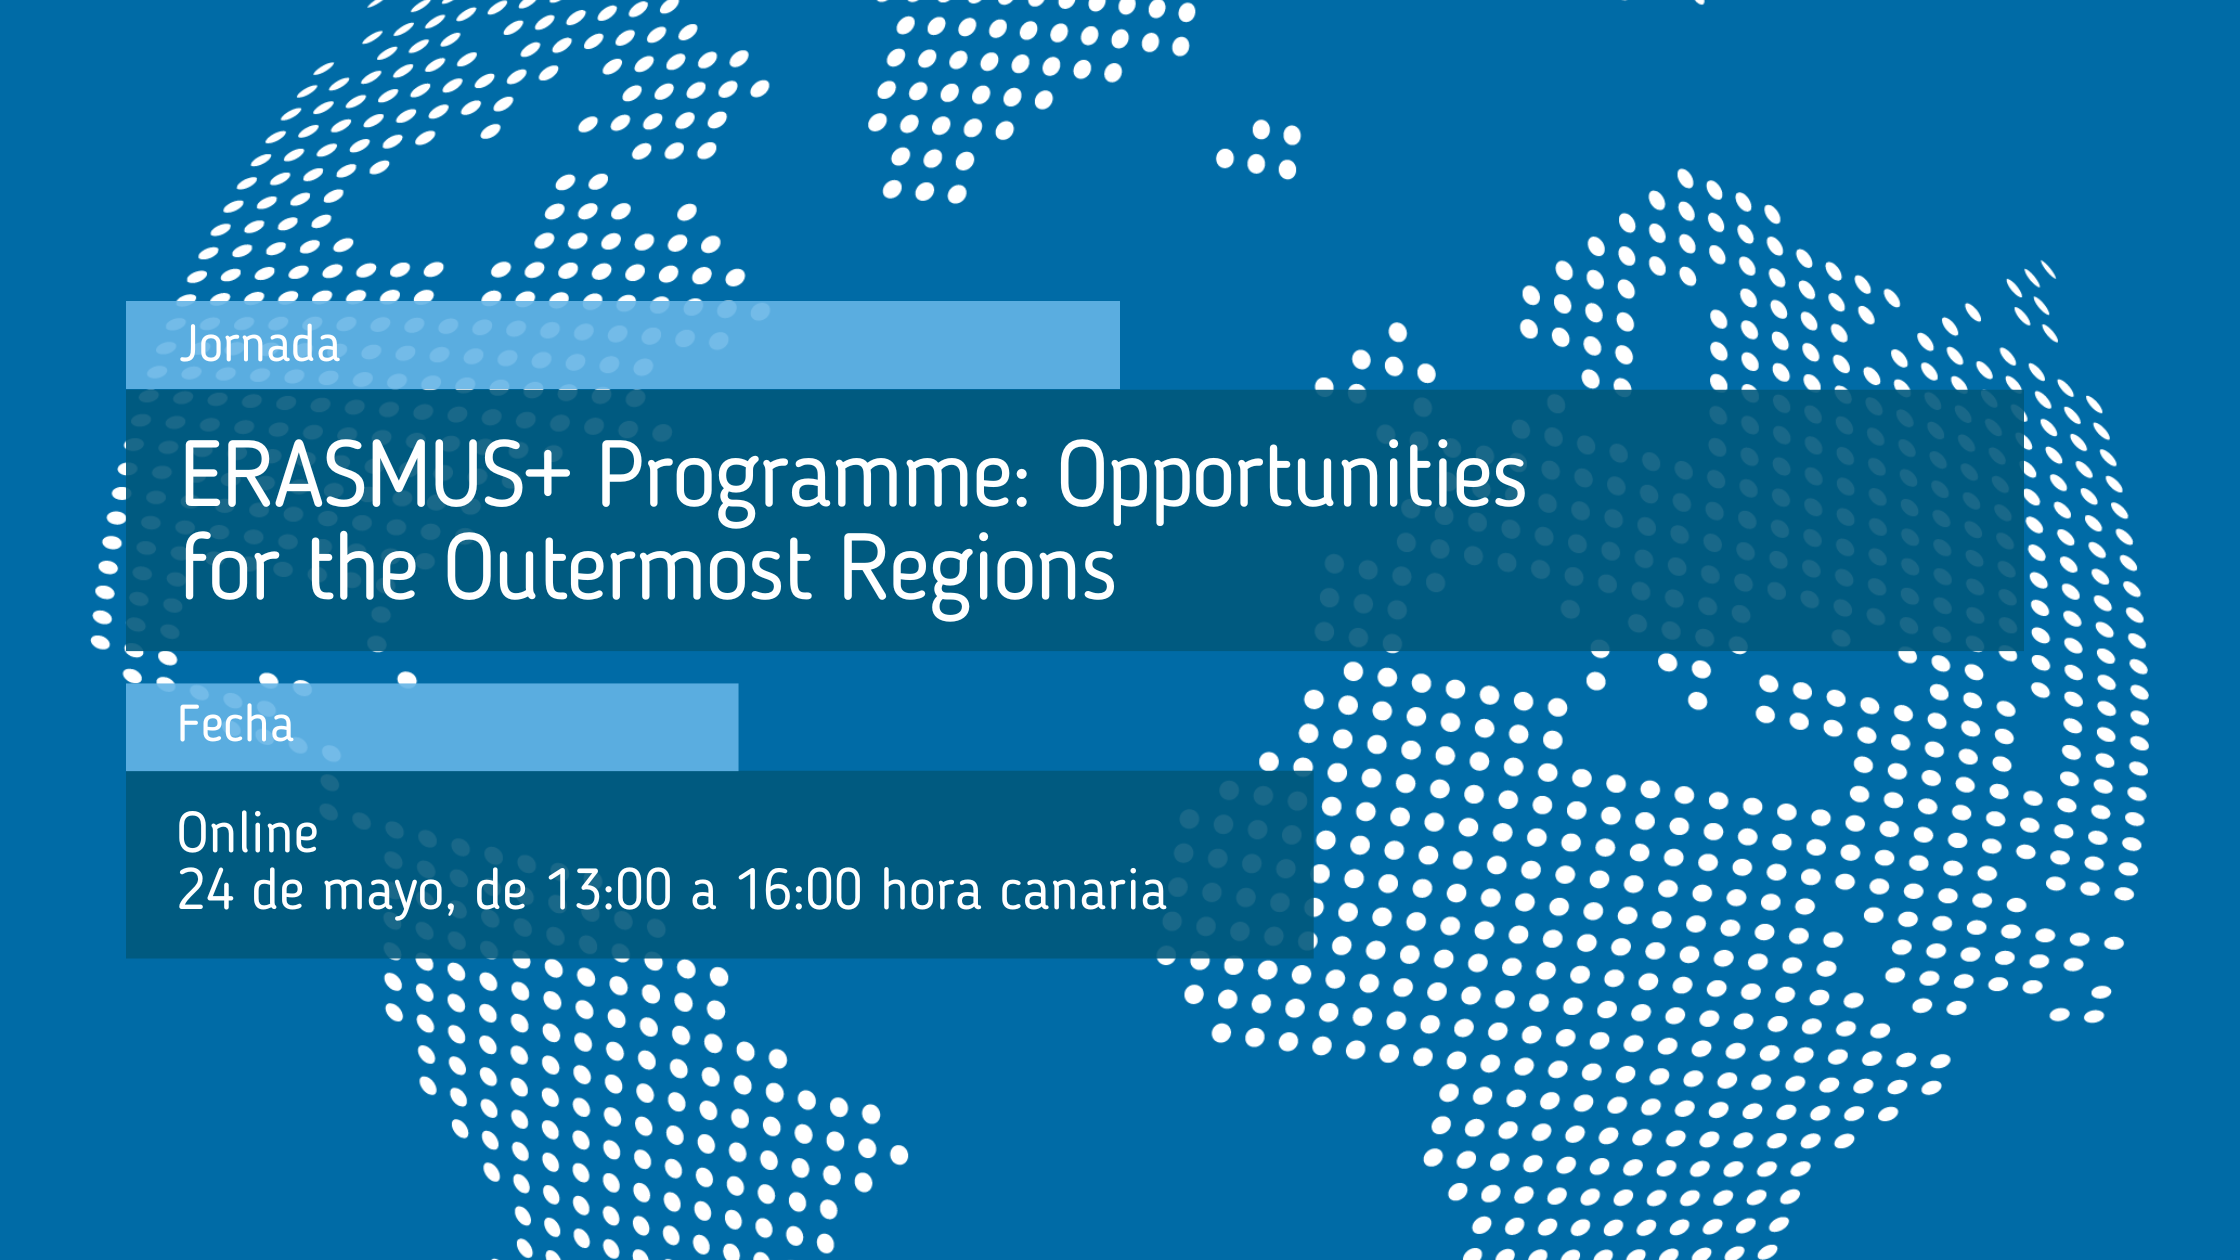 ERASMUS+_Programme_Opportunities_for_the_Outermost_Regions